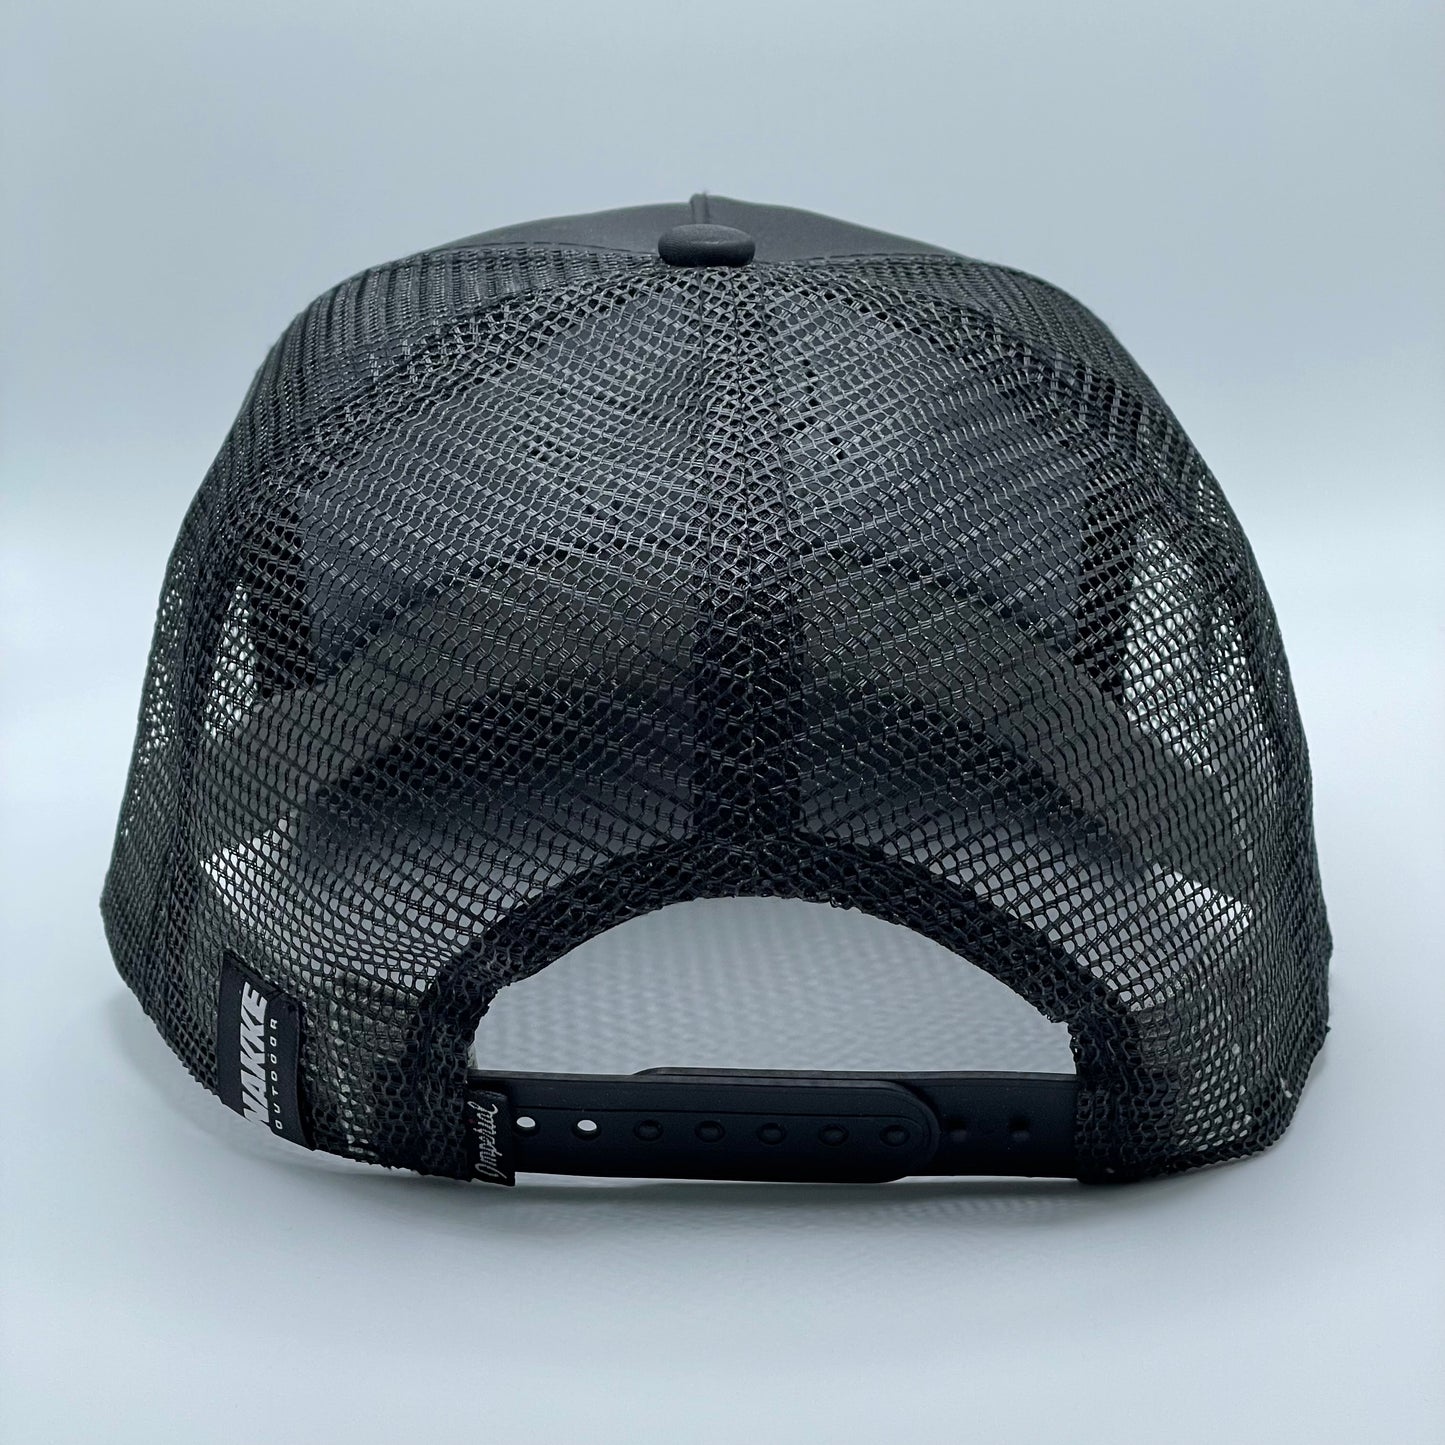 Black 5 panel retro fit mesh back hat with a white embroidered fish on the front